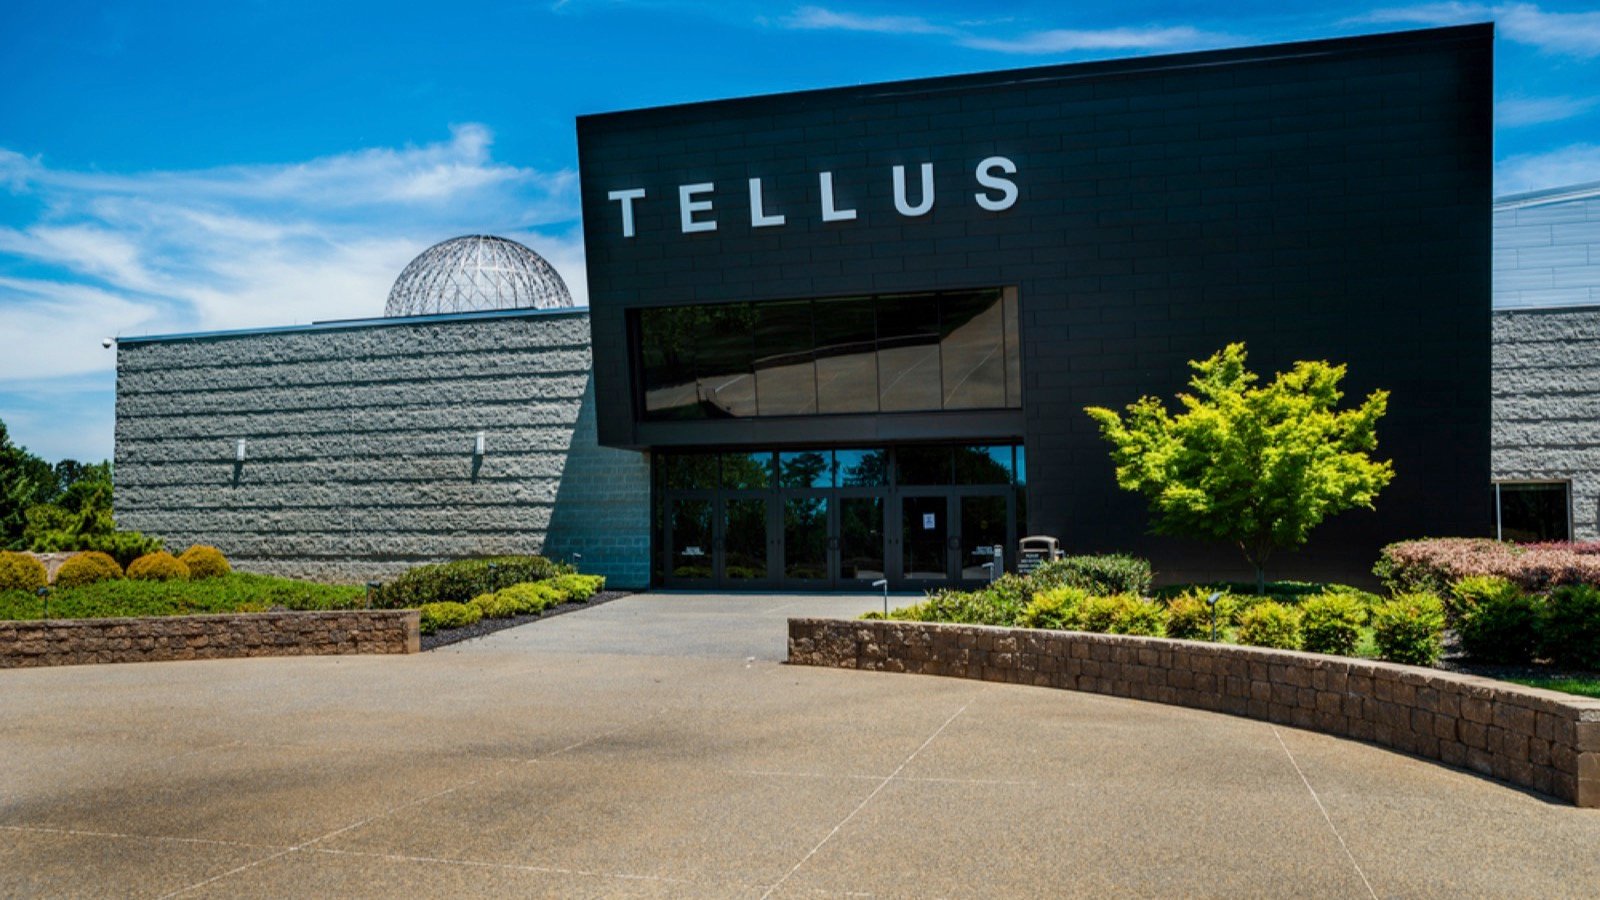 <p>Tellus Science Museum in Cartersville is an engaging venue that aims to educate and inspire through science. On display, you might see a Megalodon with a nine-foot-wide jaw, shark teeth, or replicas of the Apollo 1 capsule and Sputnik. Children can play with magnets, explore sounds, and discover rainbows.</p>